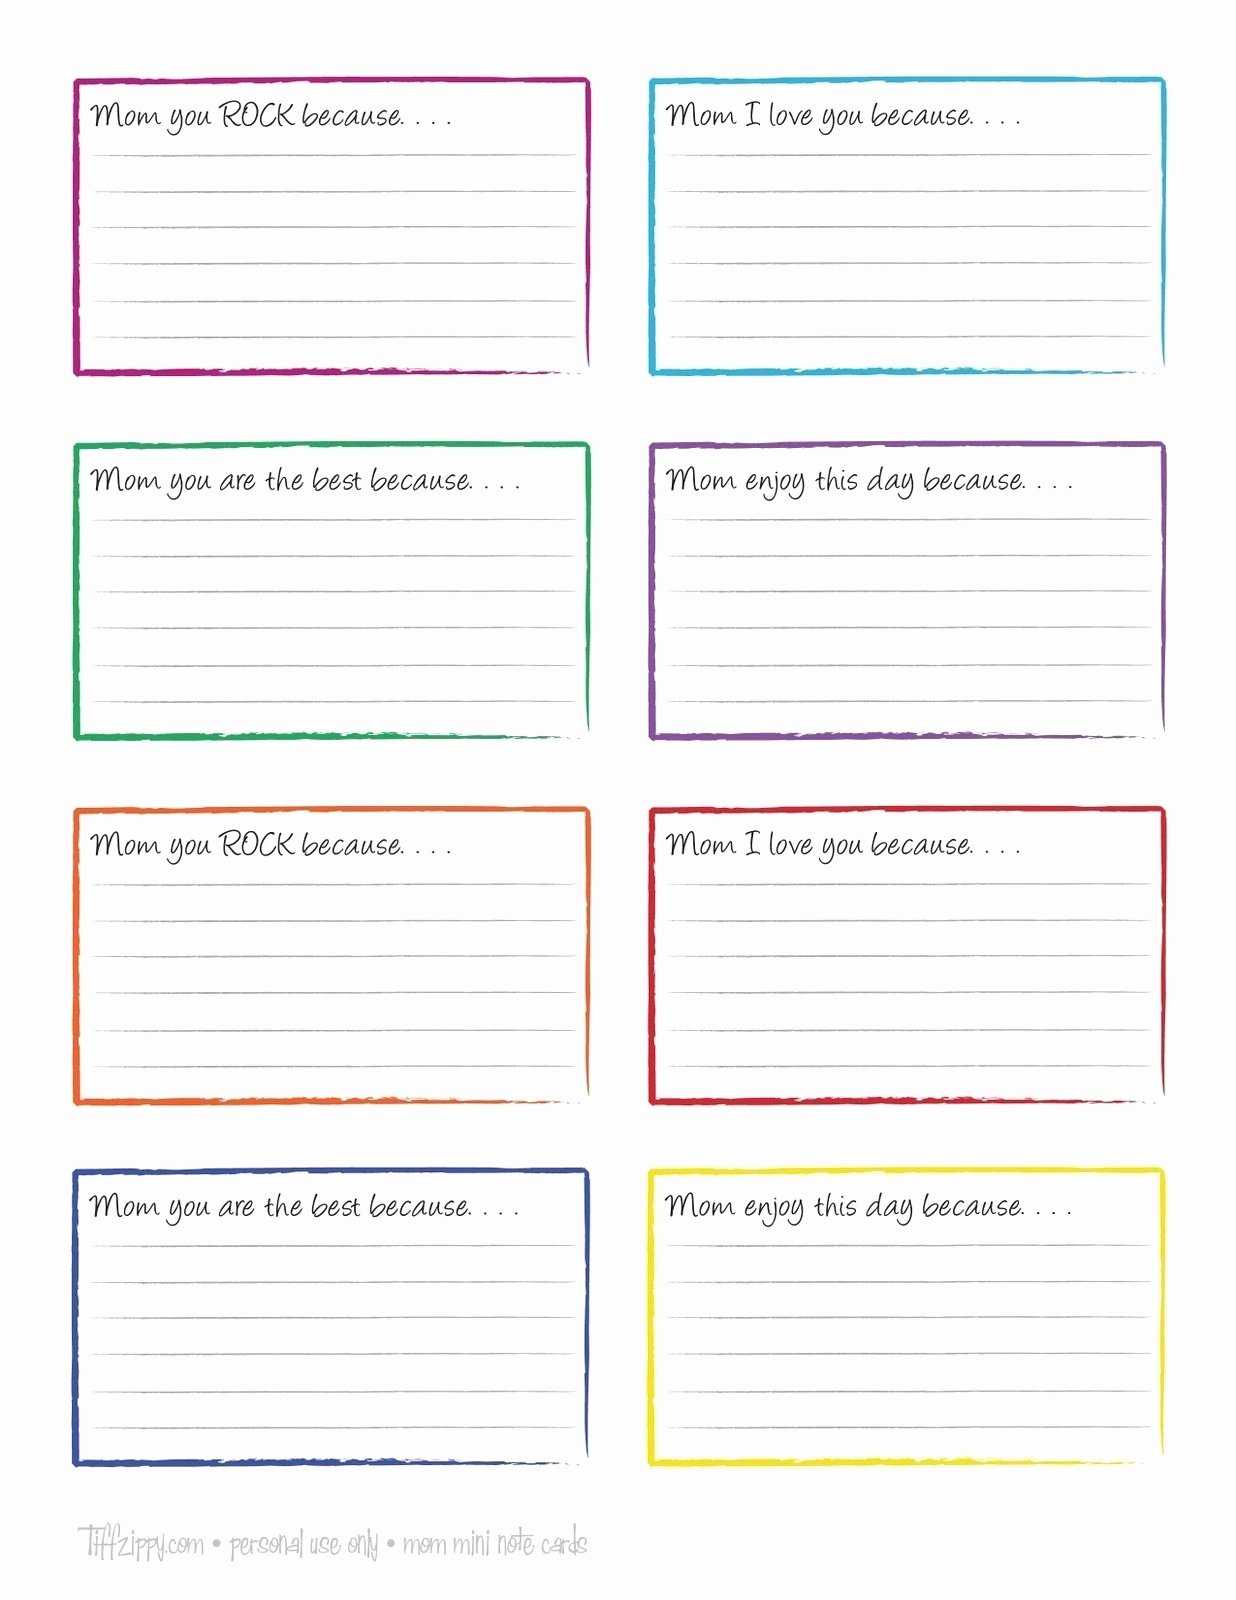 30 Note Card Template Google Docs | Pryncepality Pertaining To Microsoft Word Note Card Template